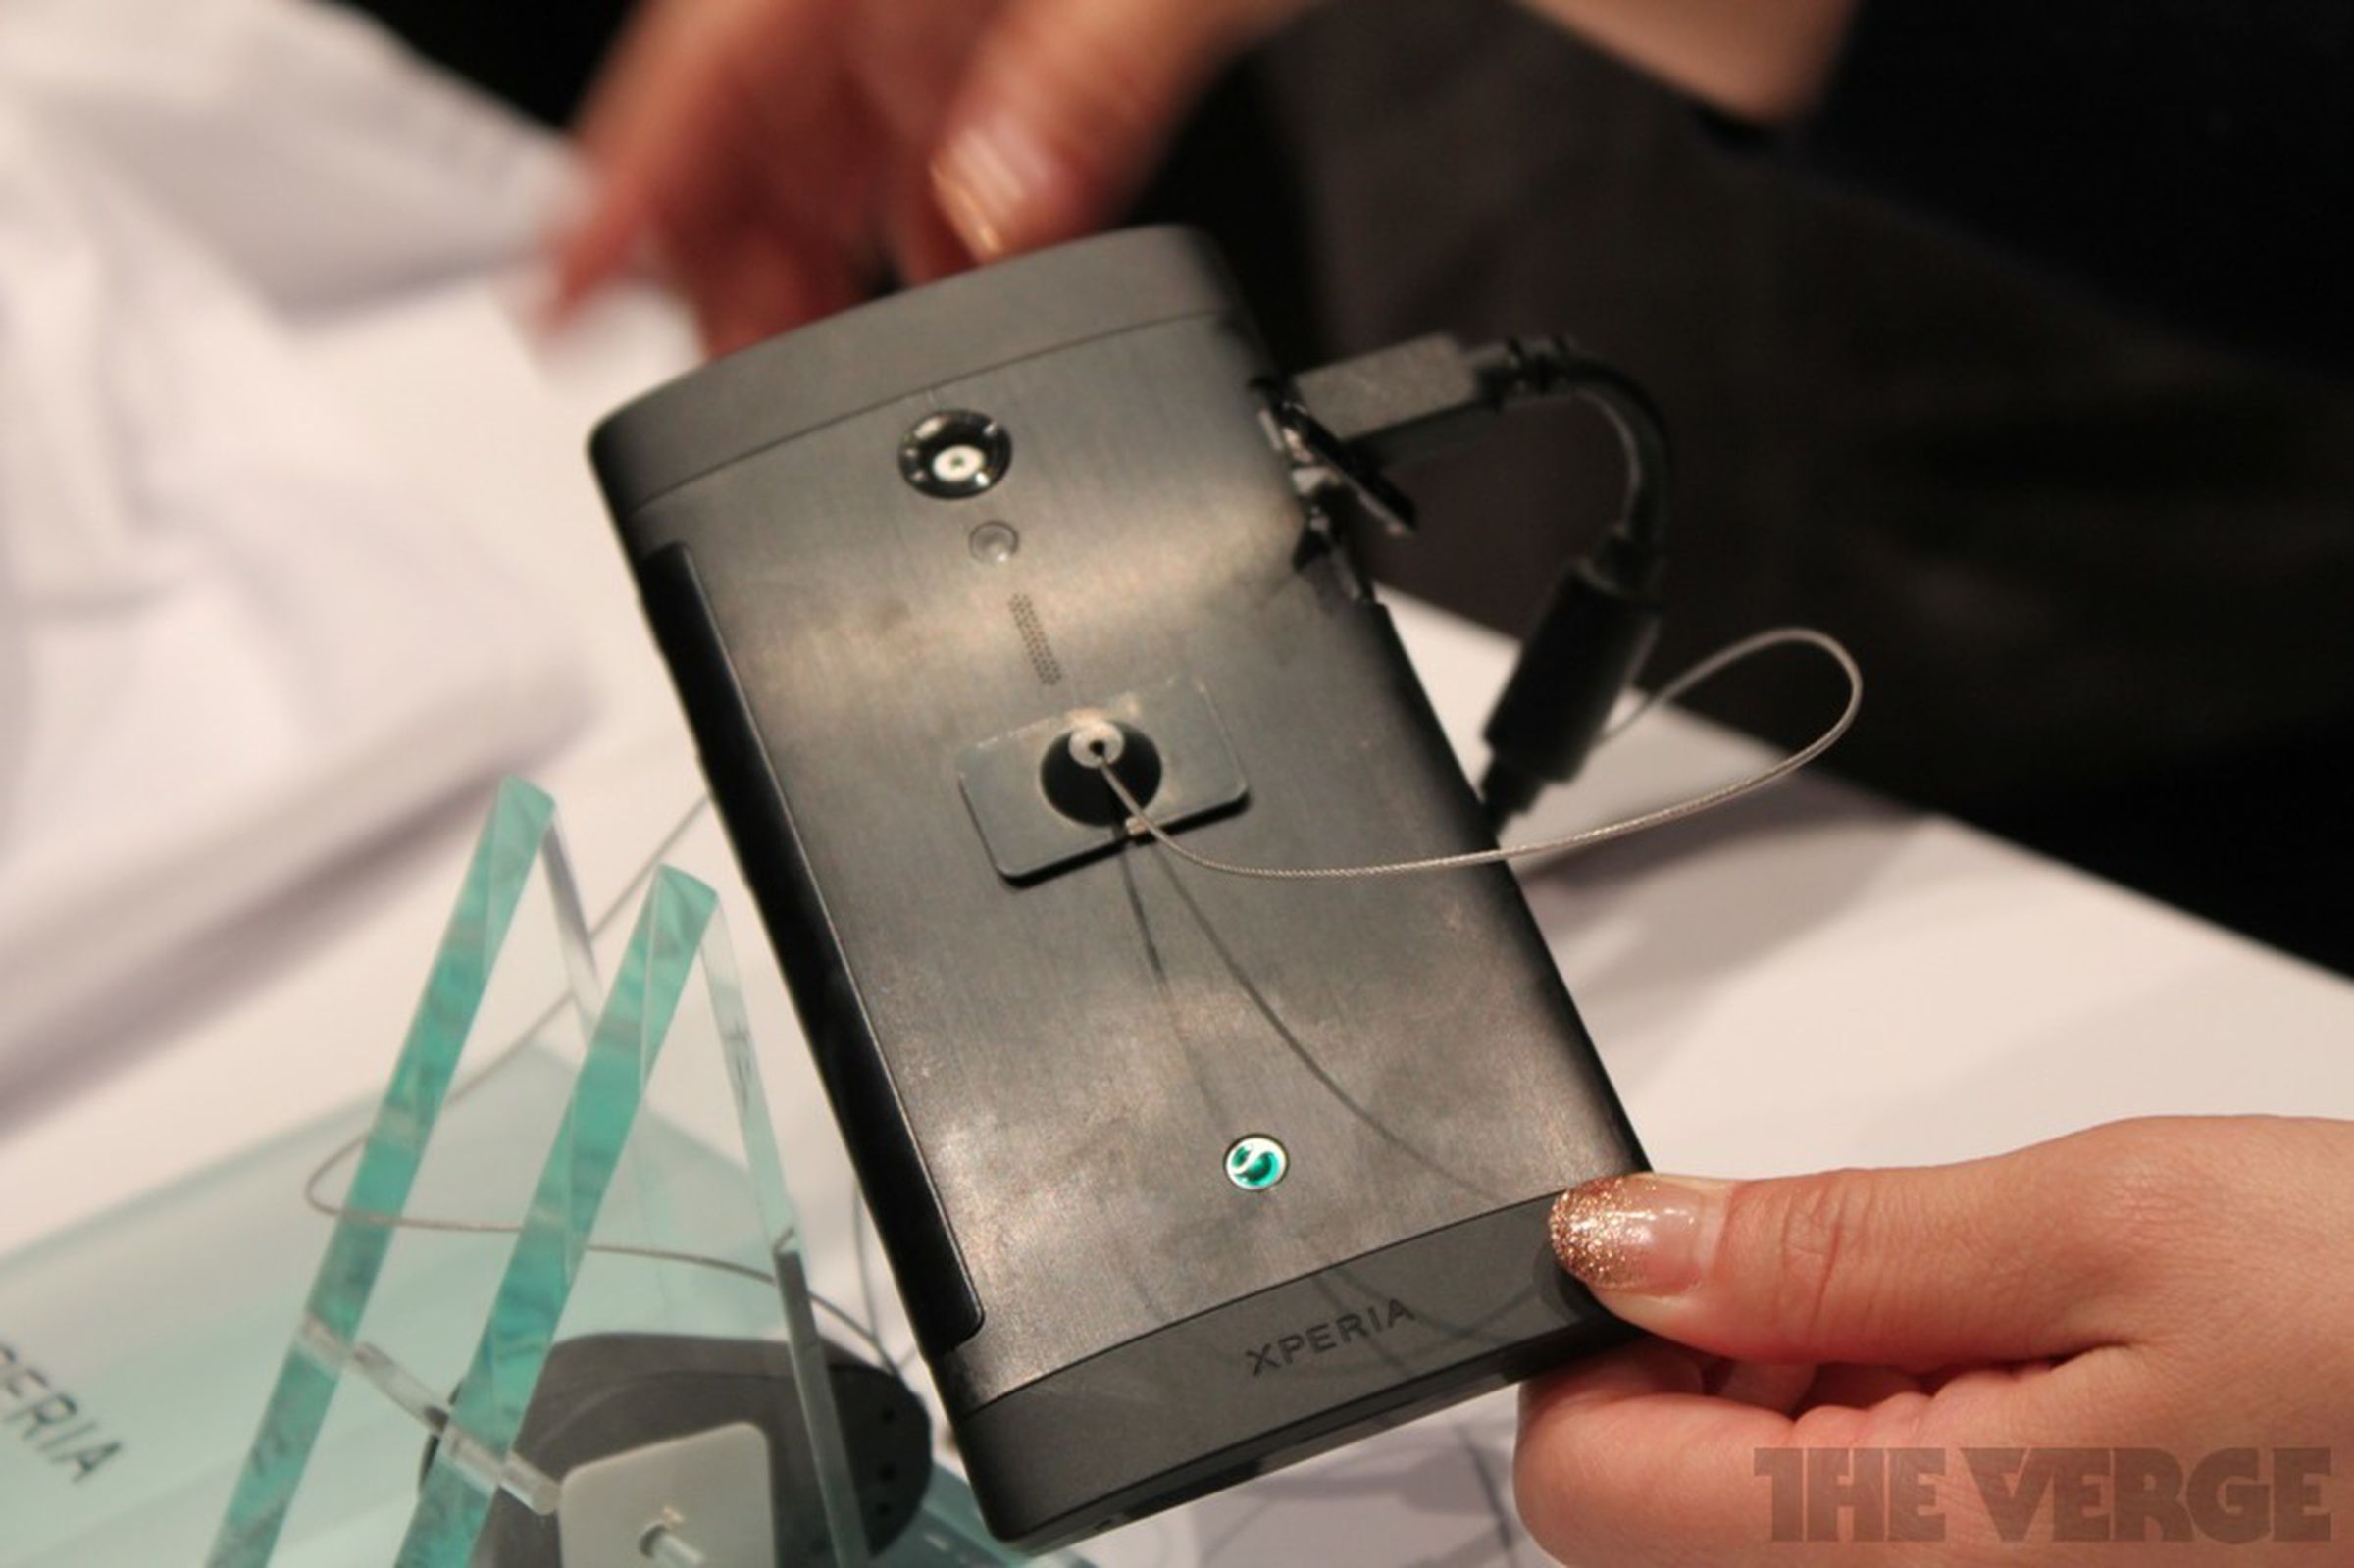 Sony Ericsson Ion hands-on pictures